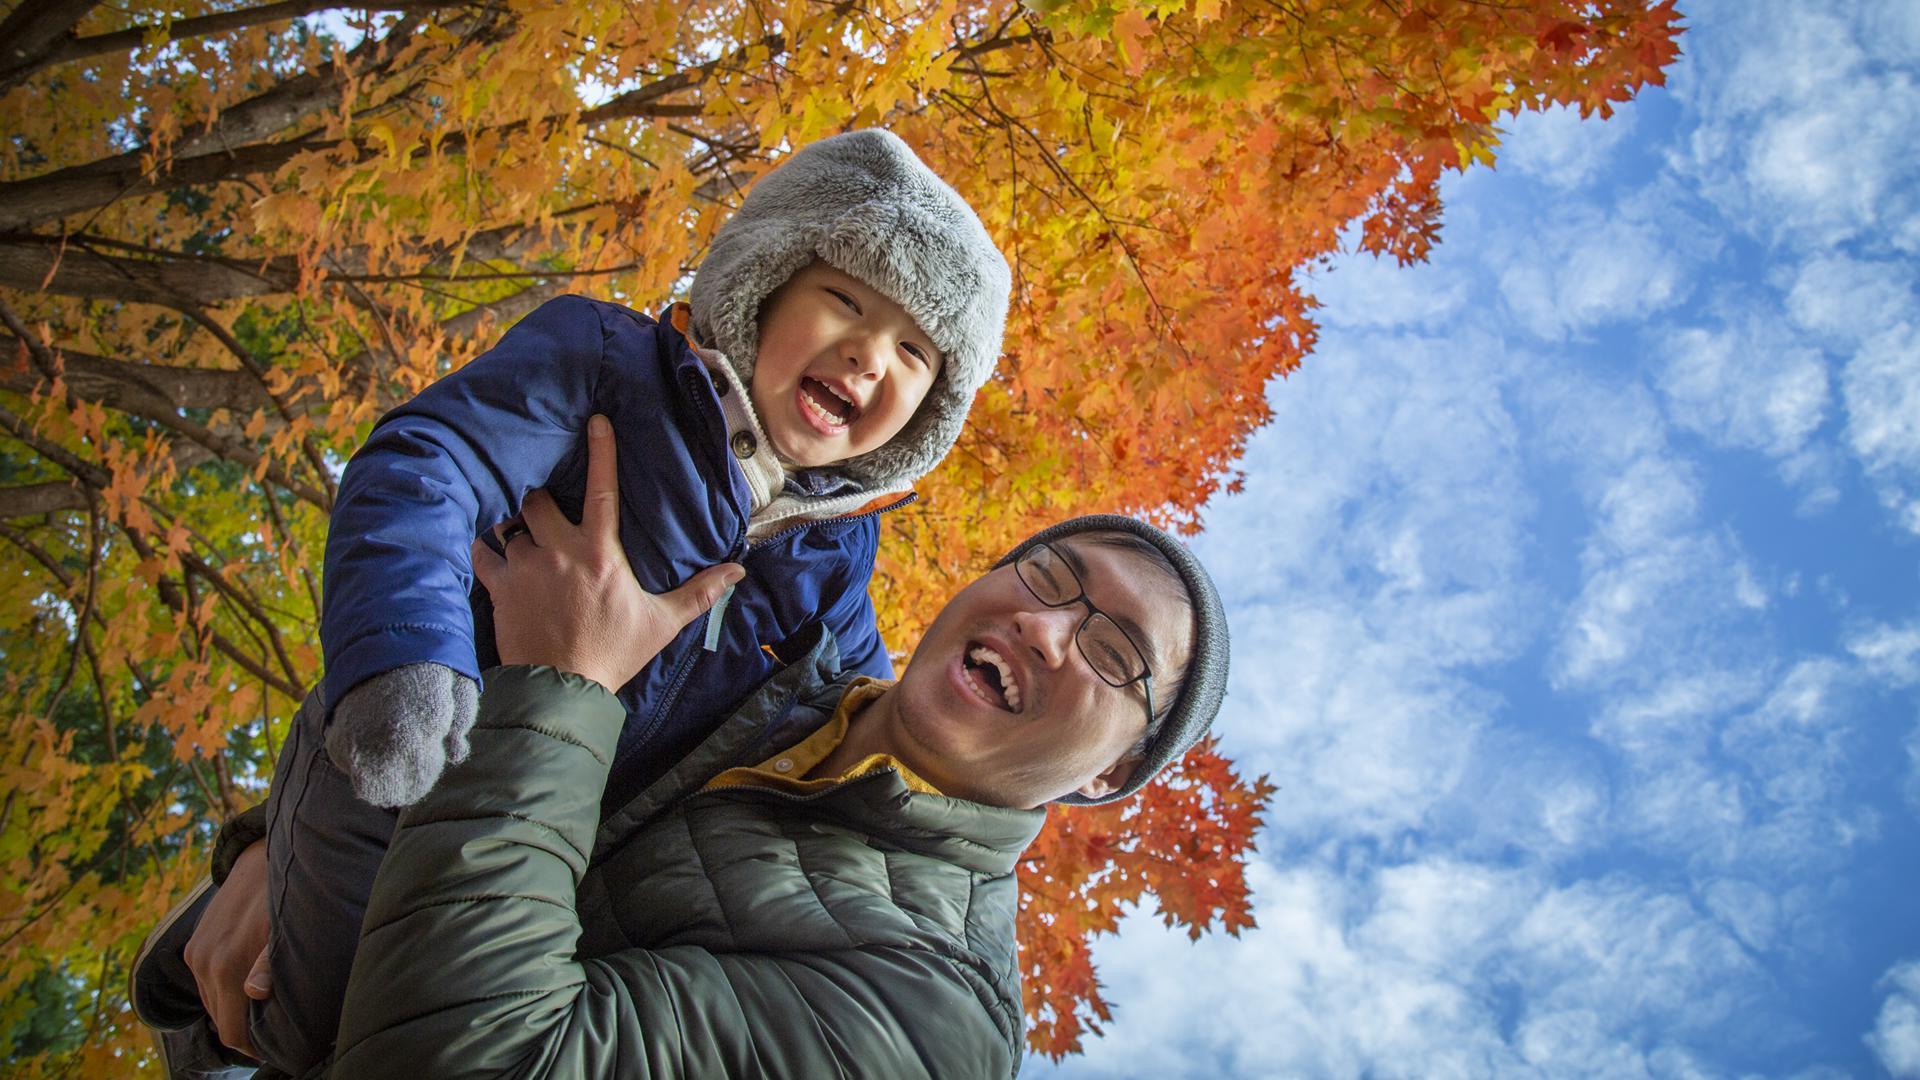 All of Us Hmong father holding young son outdoors, both smiling at camera in front of maple tree with orange leaves